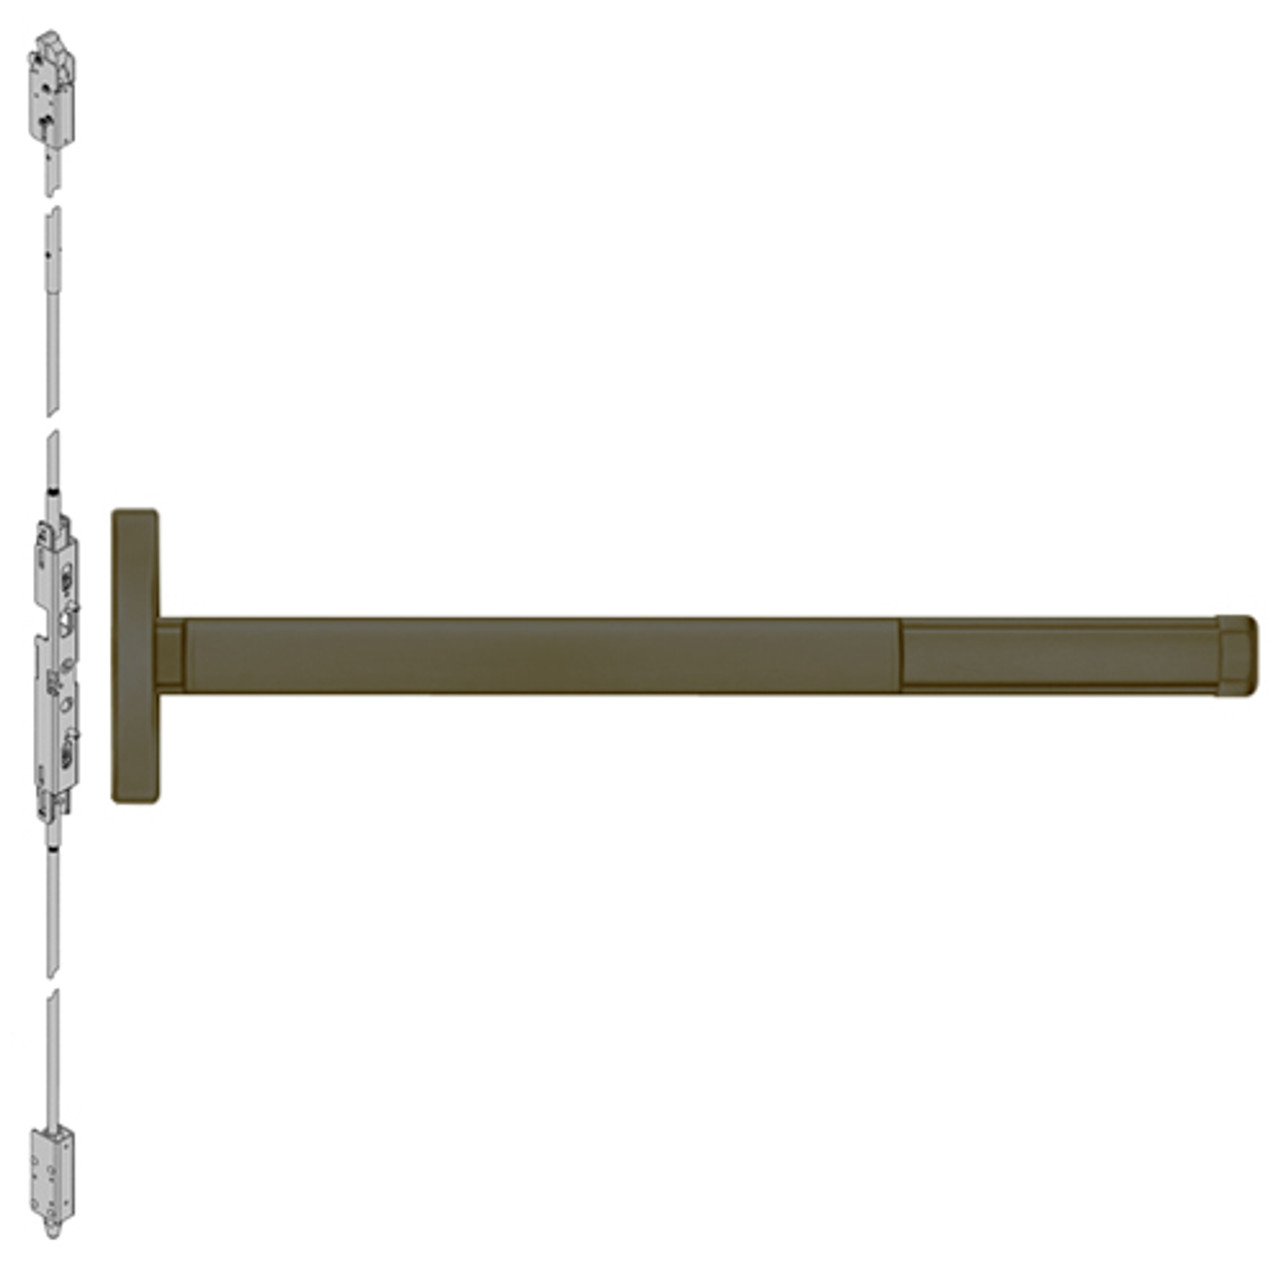 2614LBRCD-613-36 PHI 2600 Series Non Fire Rated Concealed Vertical Rod Exit Device Prepped for Lever Always Active with Cylinder Dogging and LBR in Oil Rubbed Bronze Finish